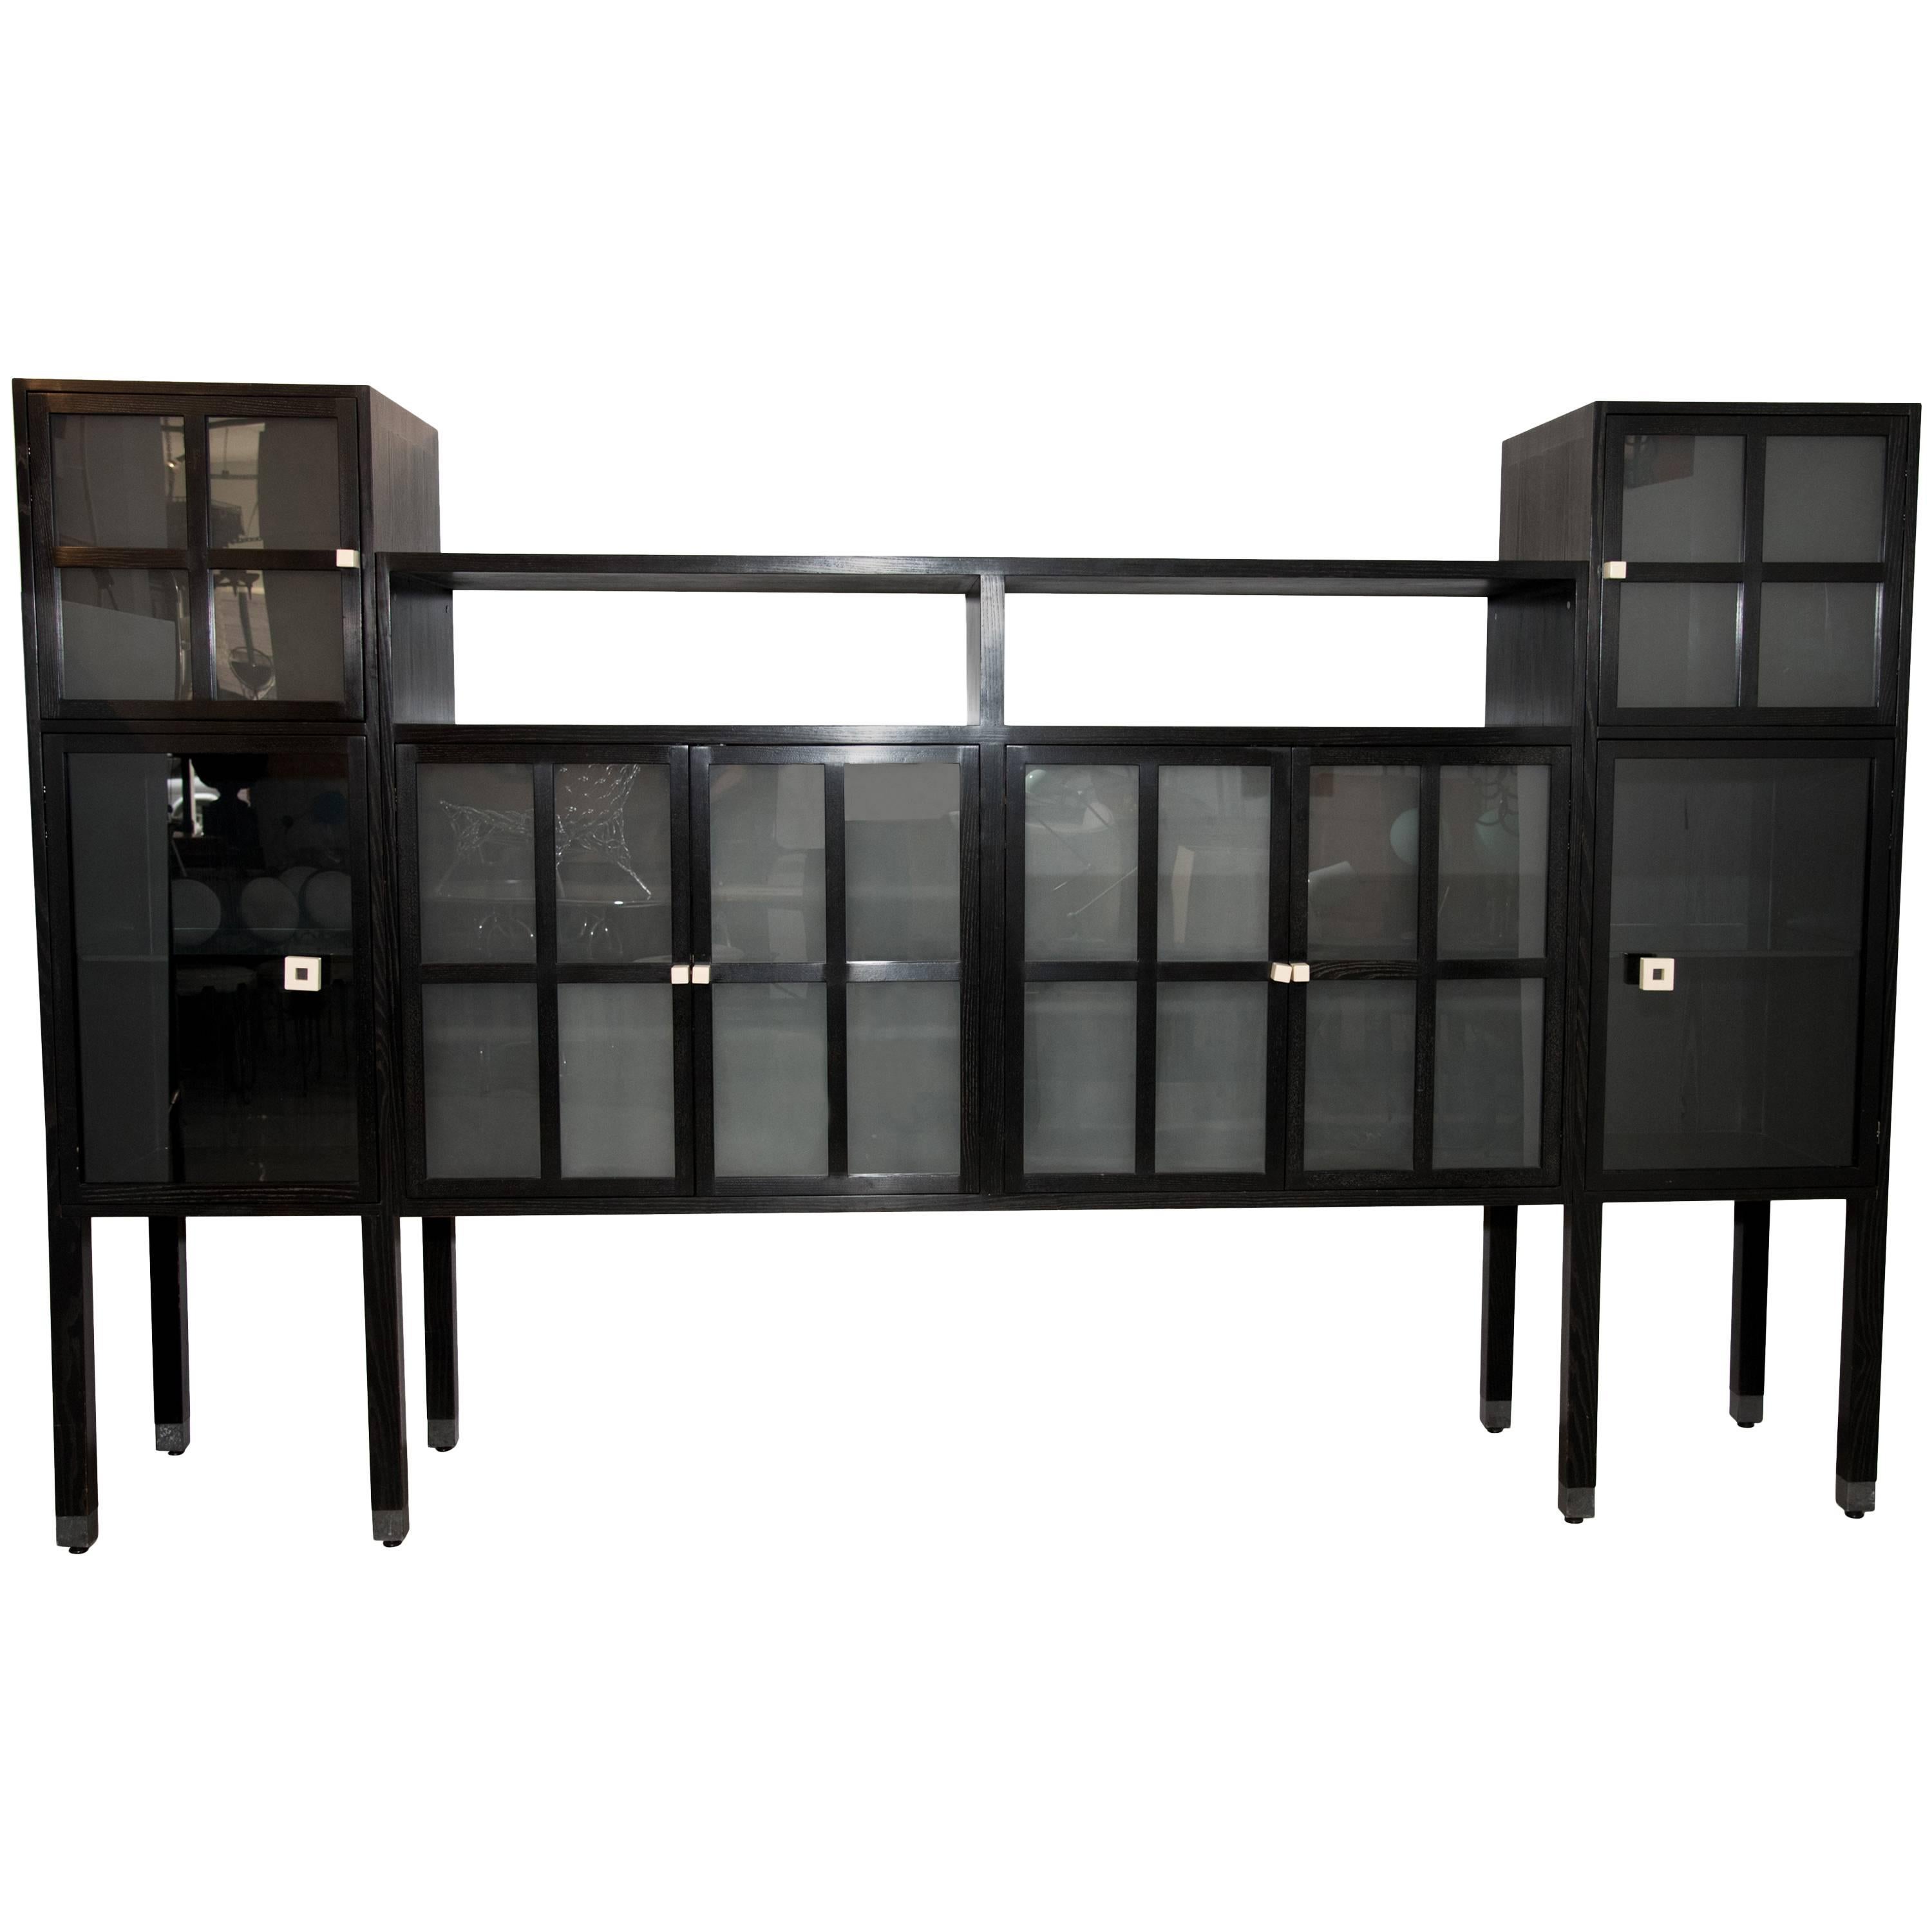 Leon Rosen for Pace Collection "Piombo" Cerused Wood and Glass Cabinet For Sale